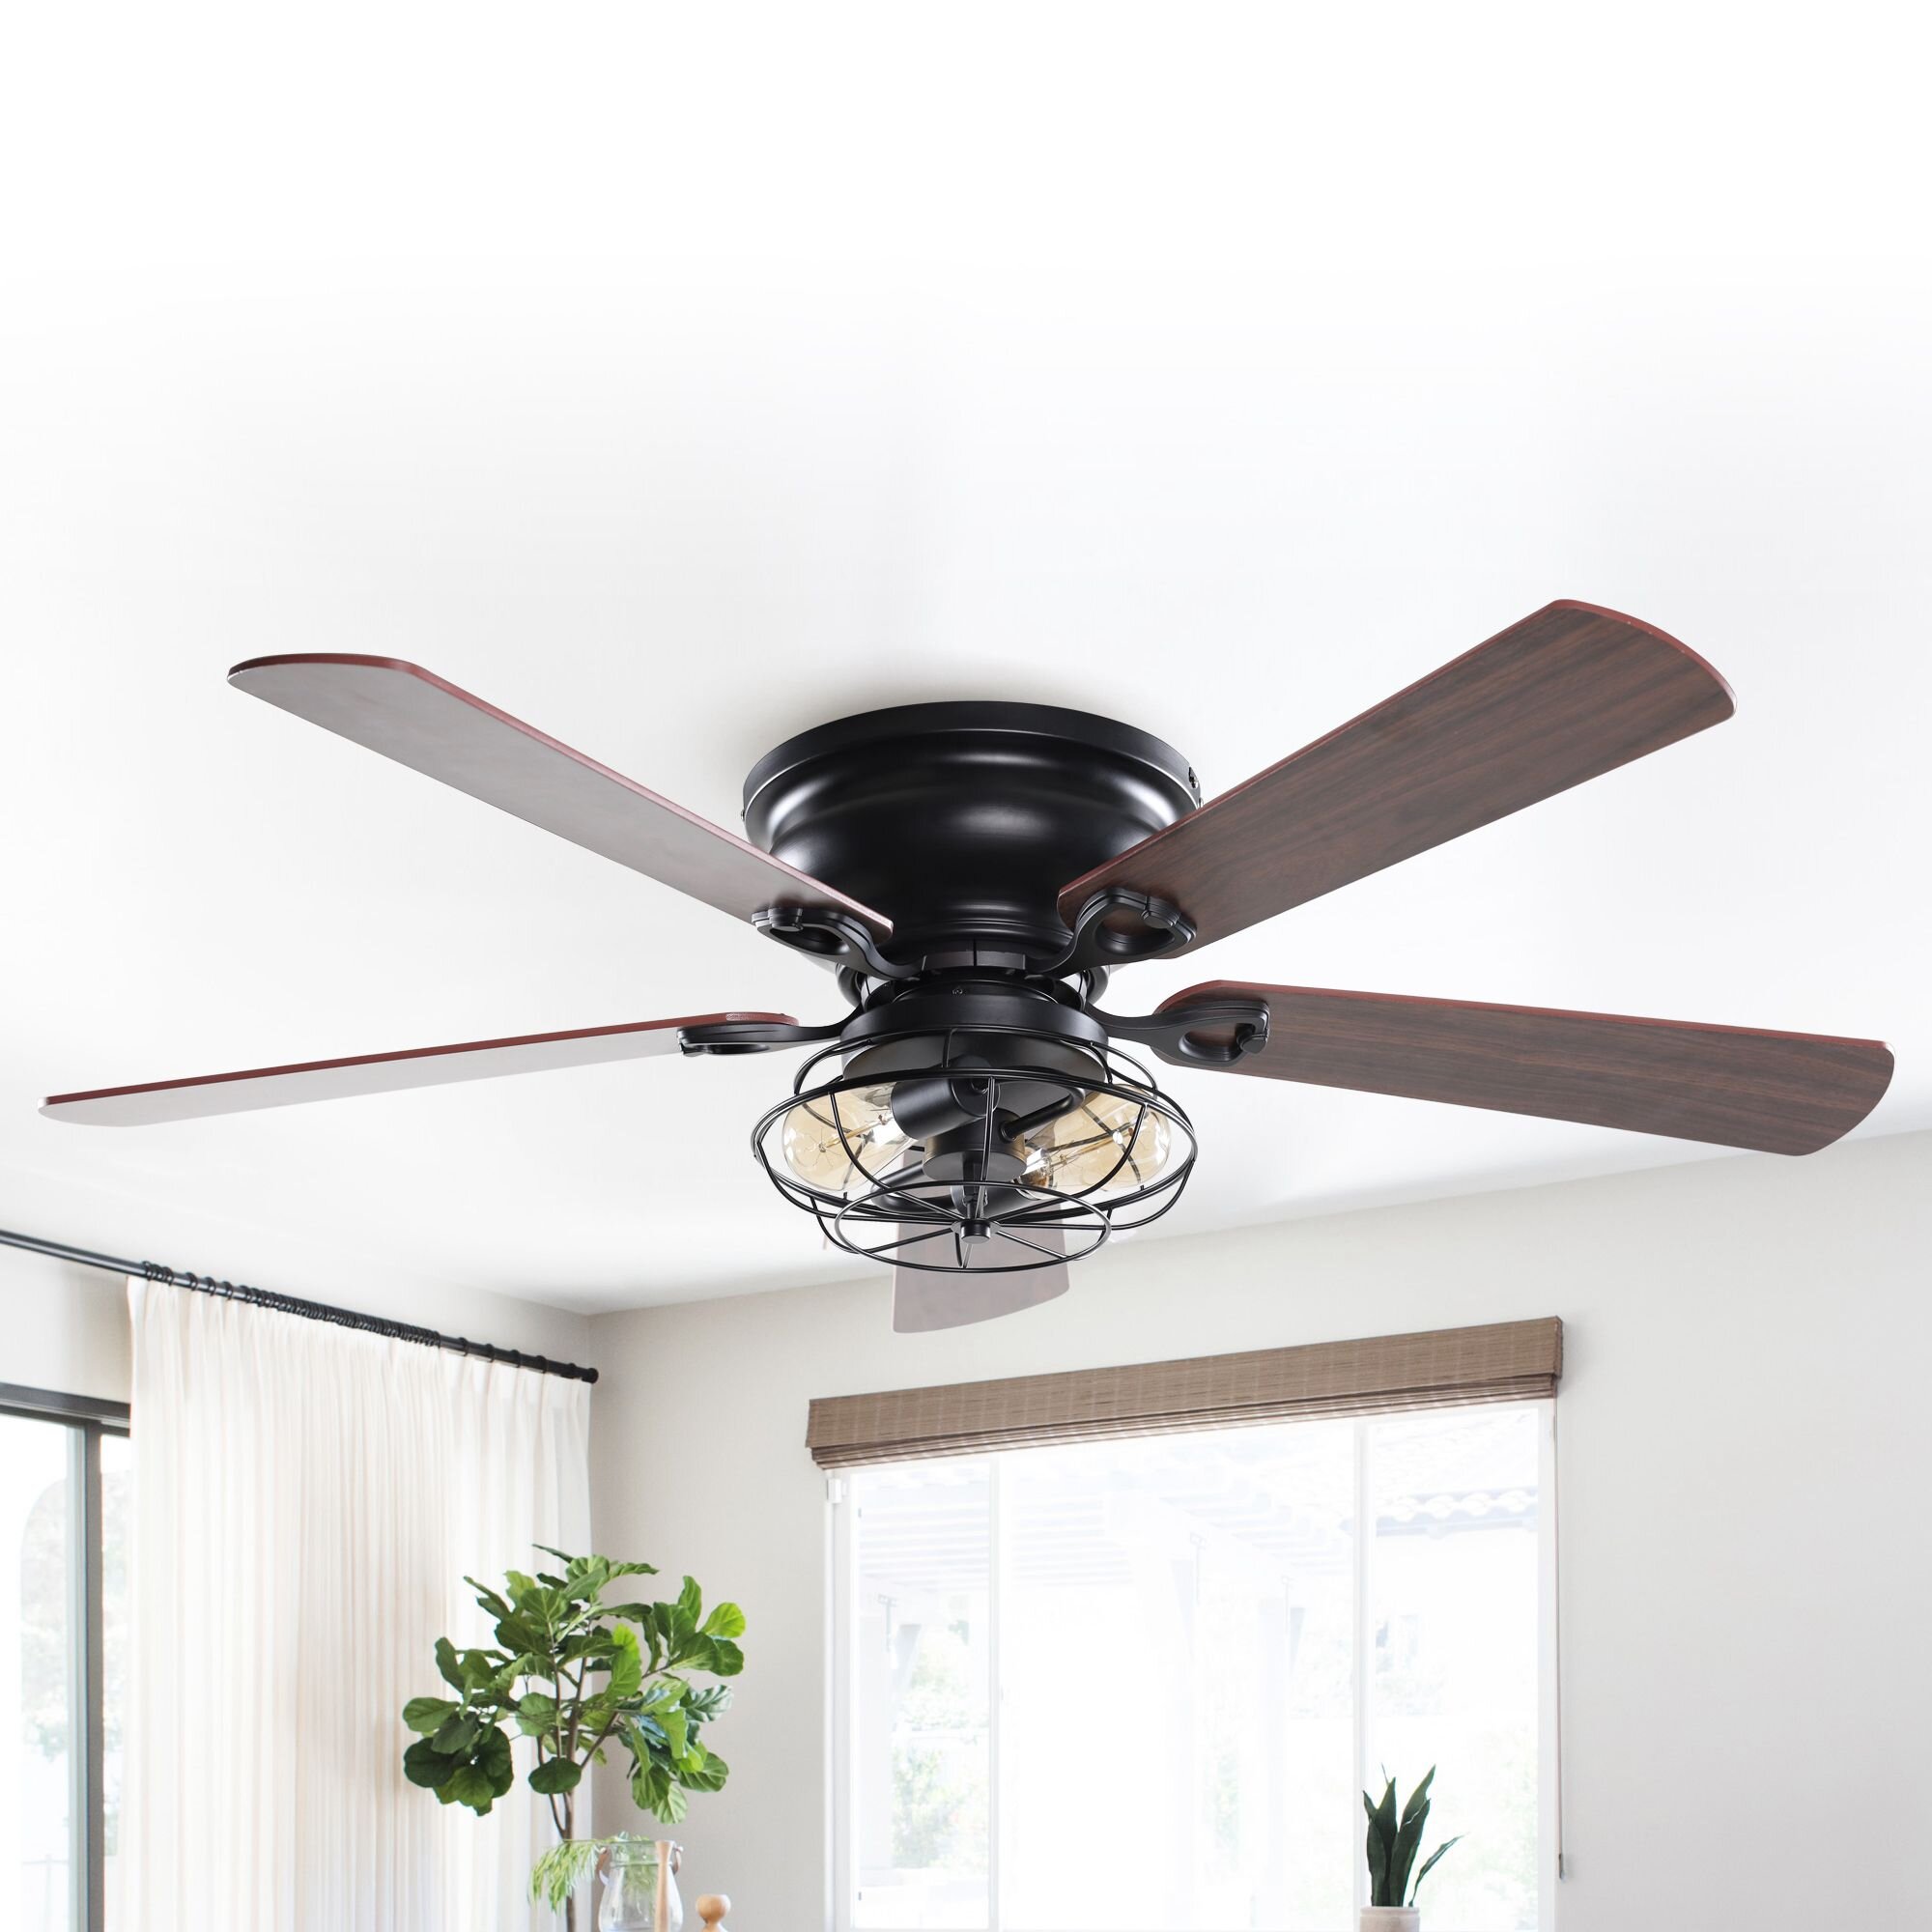 17 Stories 48 Thurber 5 Blade Crystal Ceiling Fan With Remote Control And Light Kit Included Reviews Wayfair